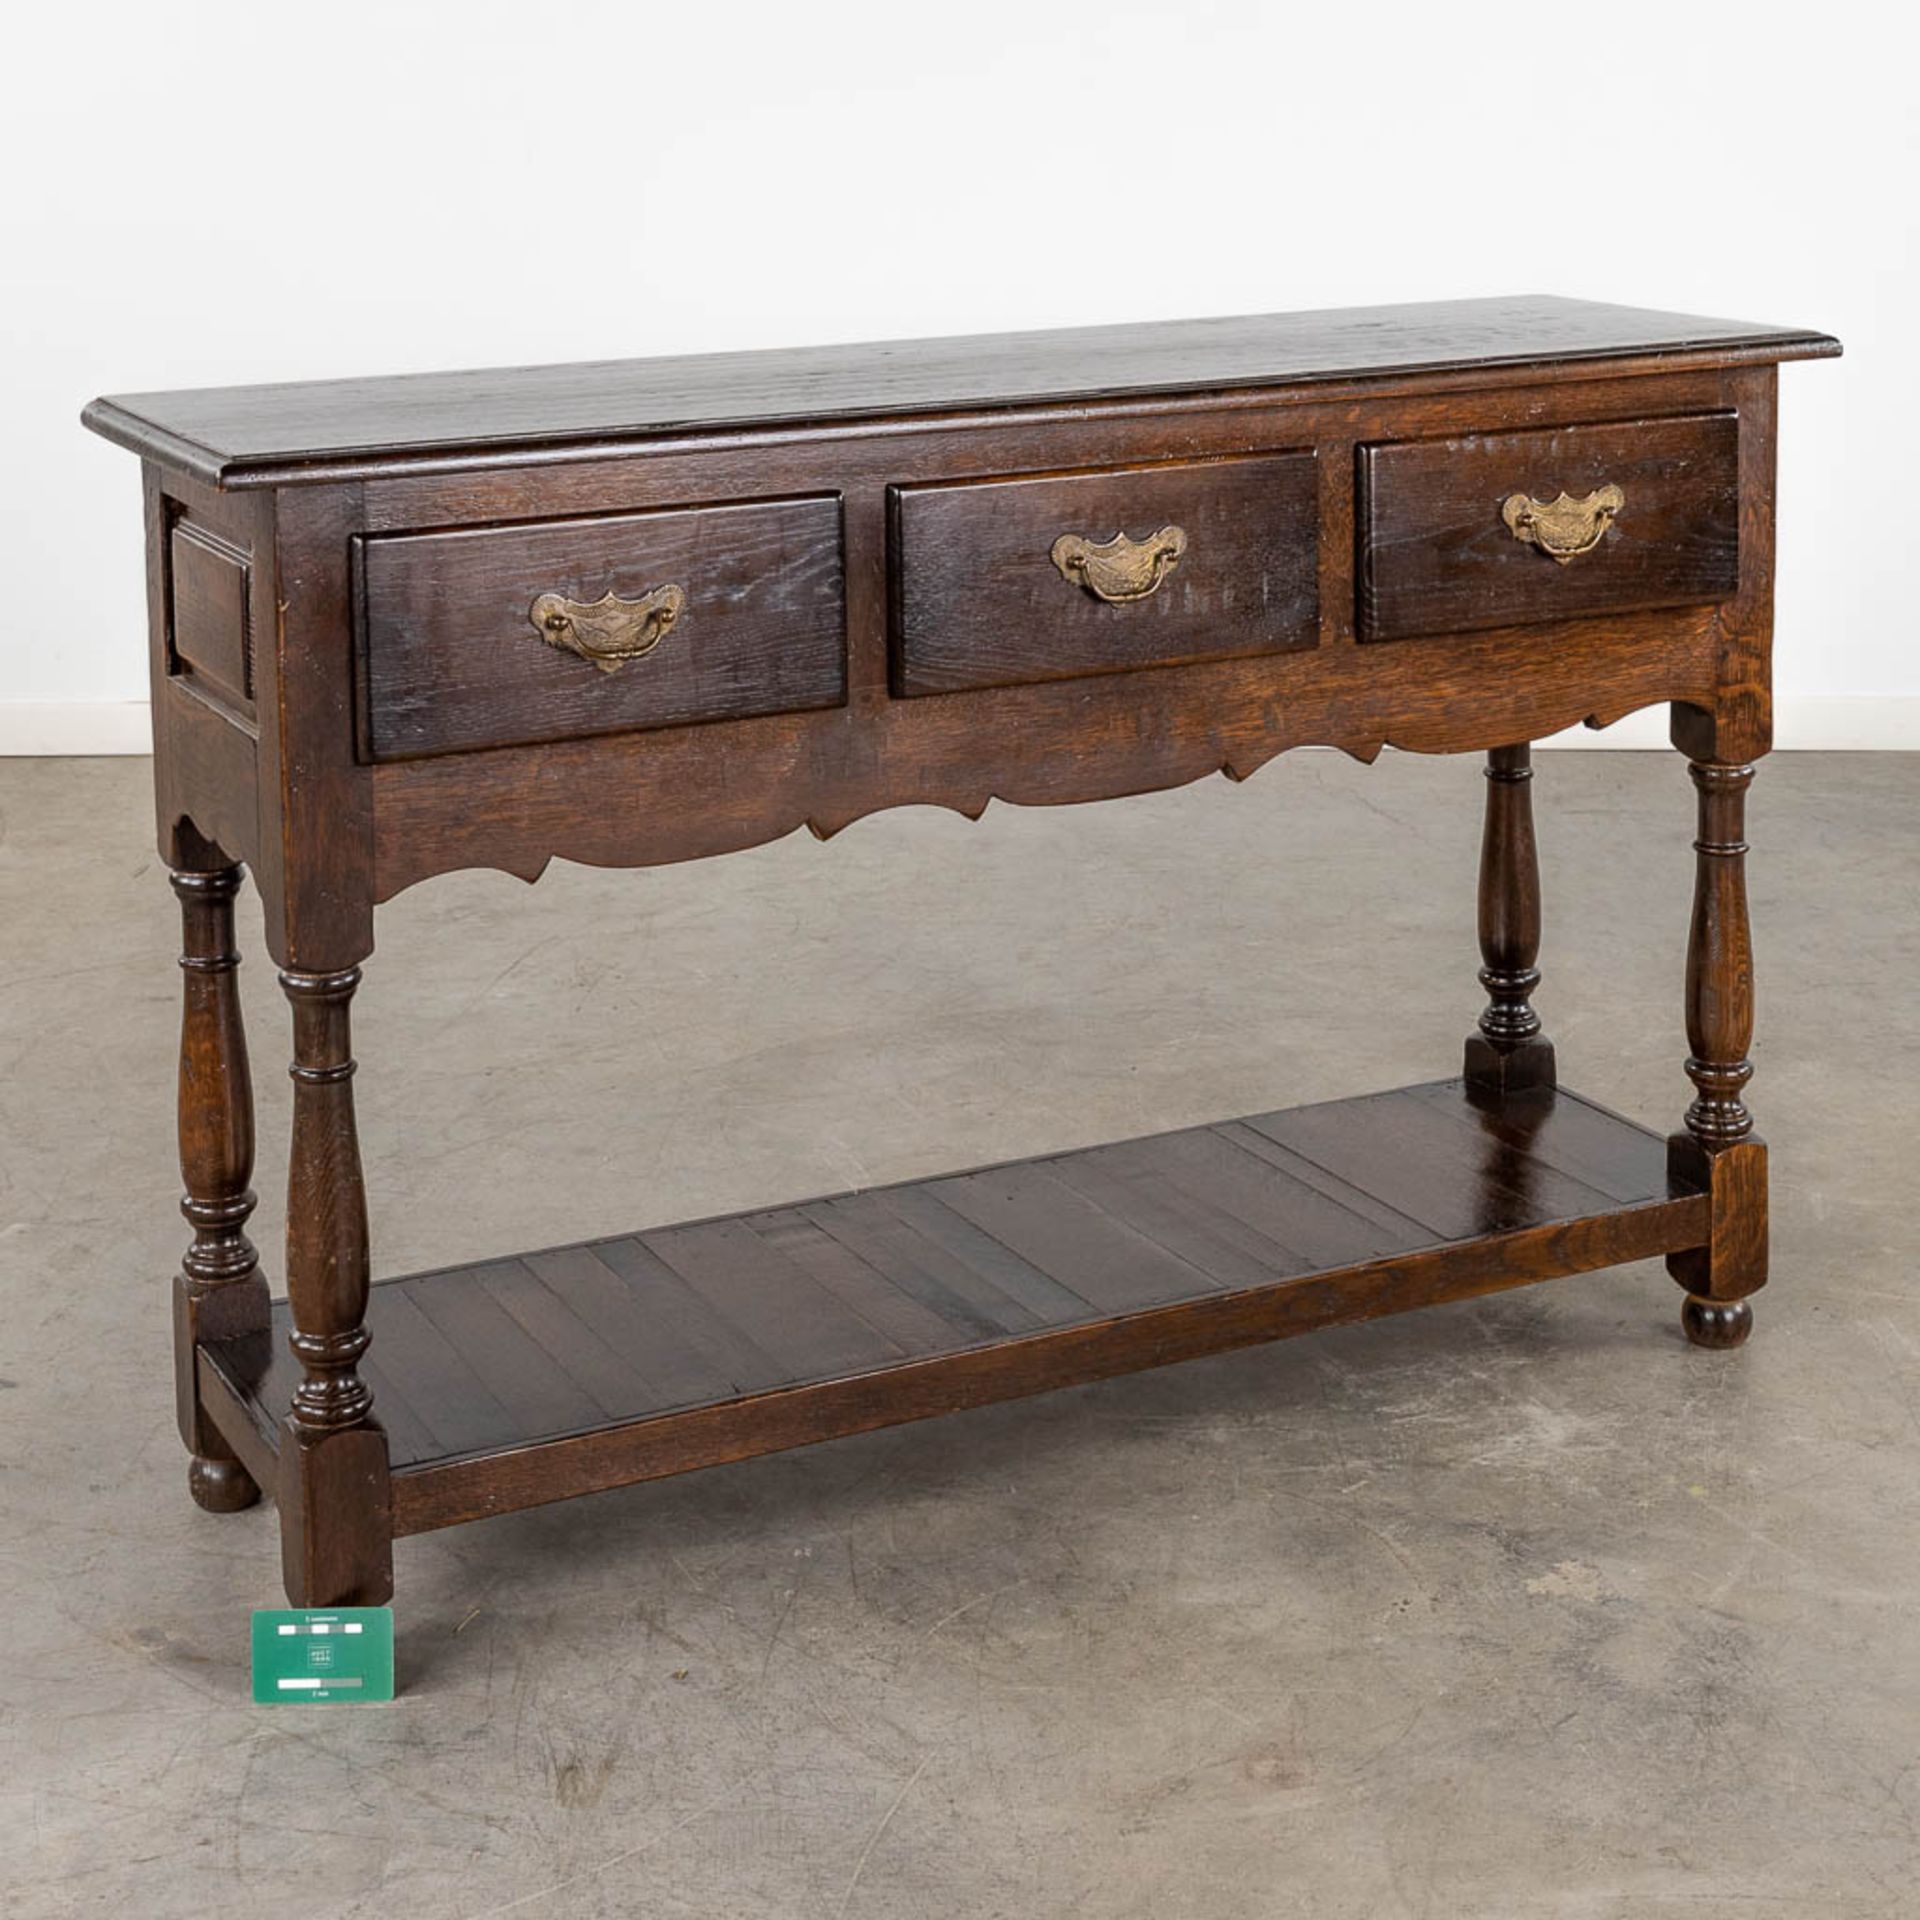 An English console table with 3 drawers. 20th C. (D:35 x W:120 x H:77 cm) - Image 2 of 8